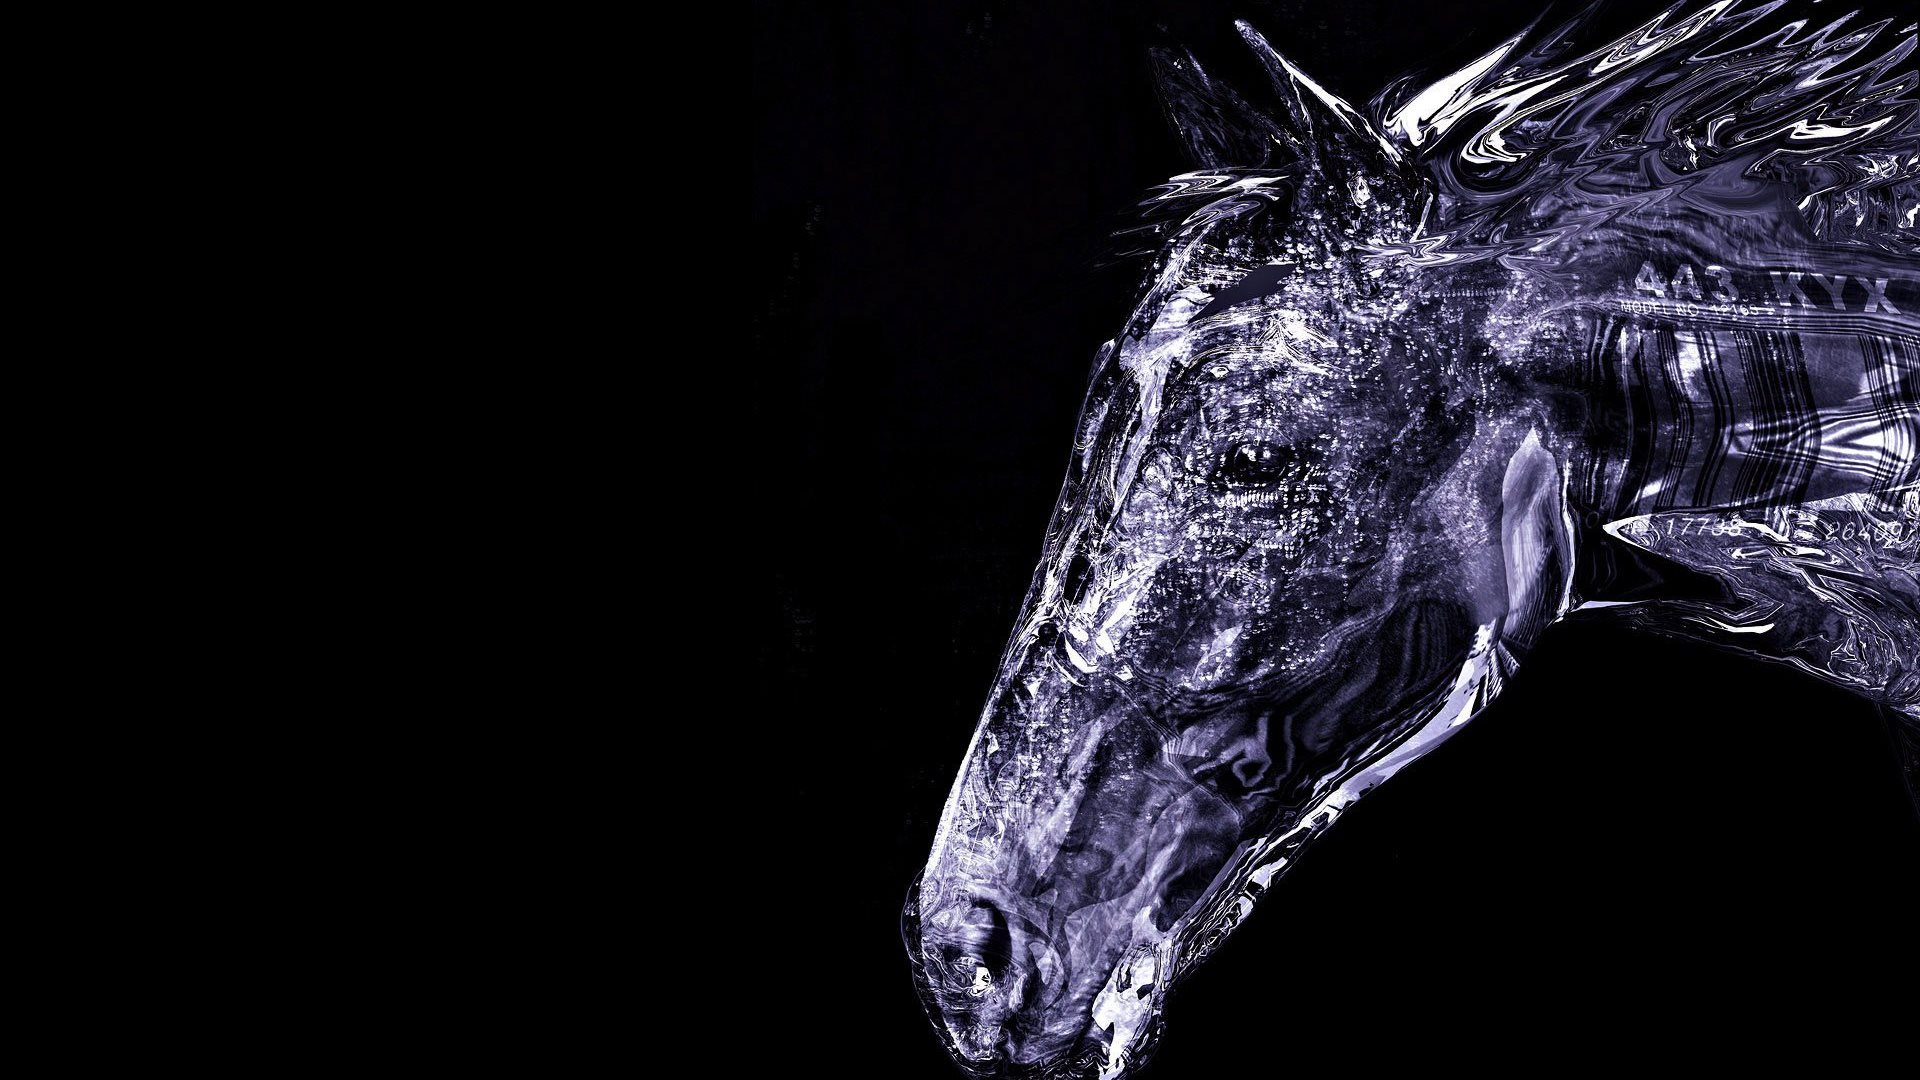 hd wallpapers for pc,black,black and white,horse,snout,organism